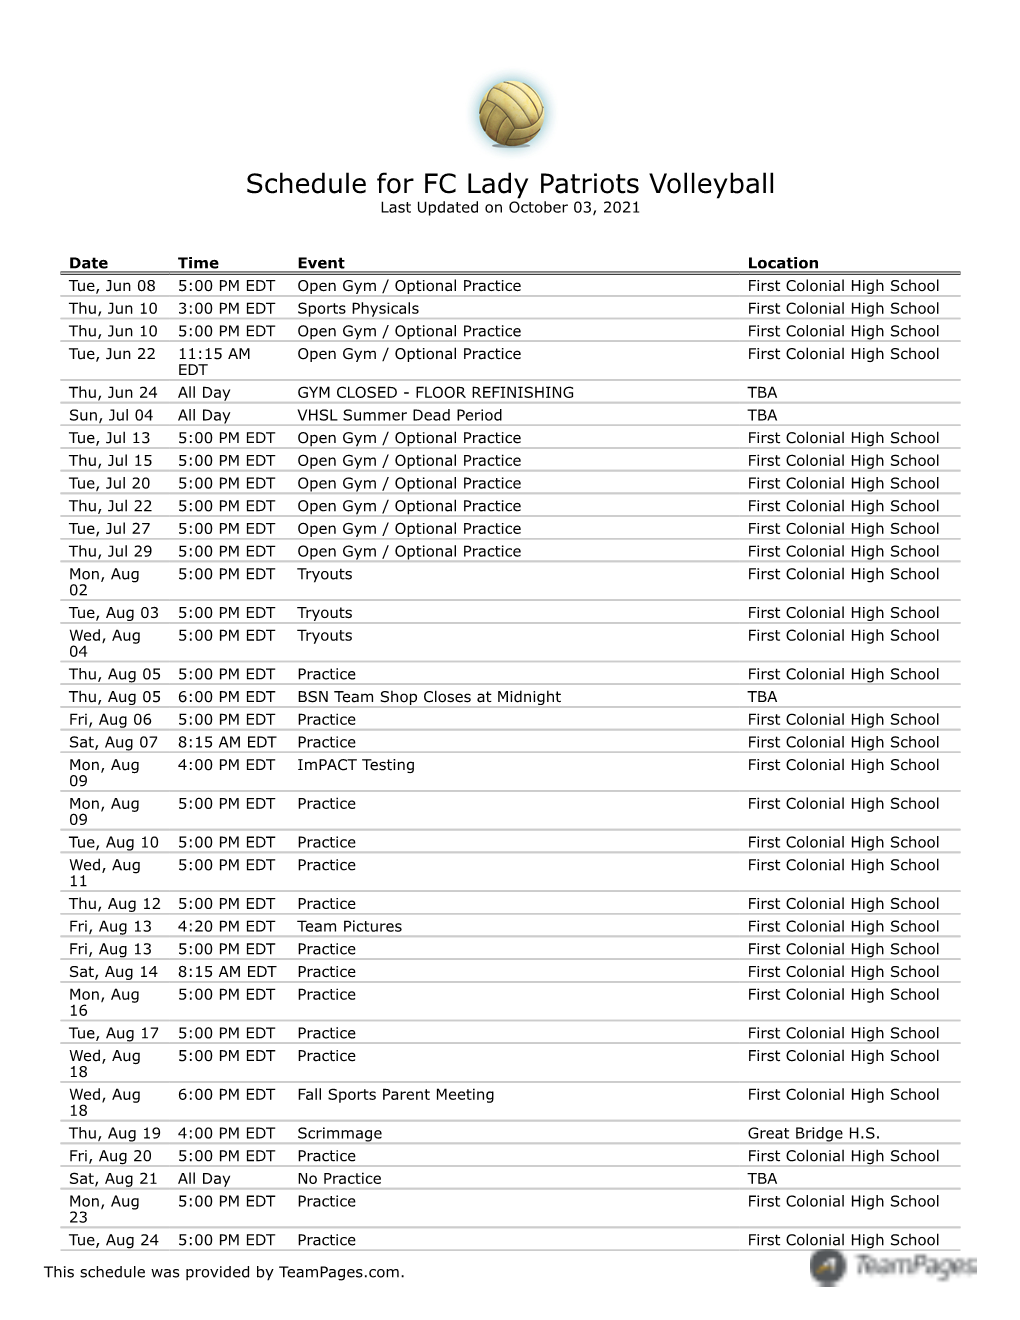 Schedule for FC Lady Patriots Volleyball Last Updated on October 03, 2021